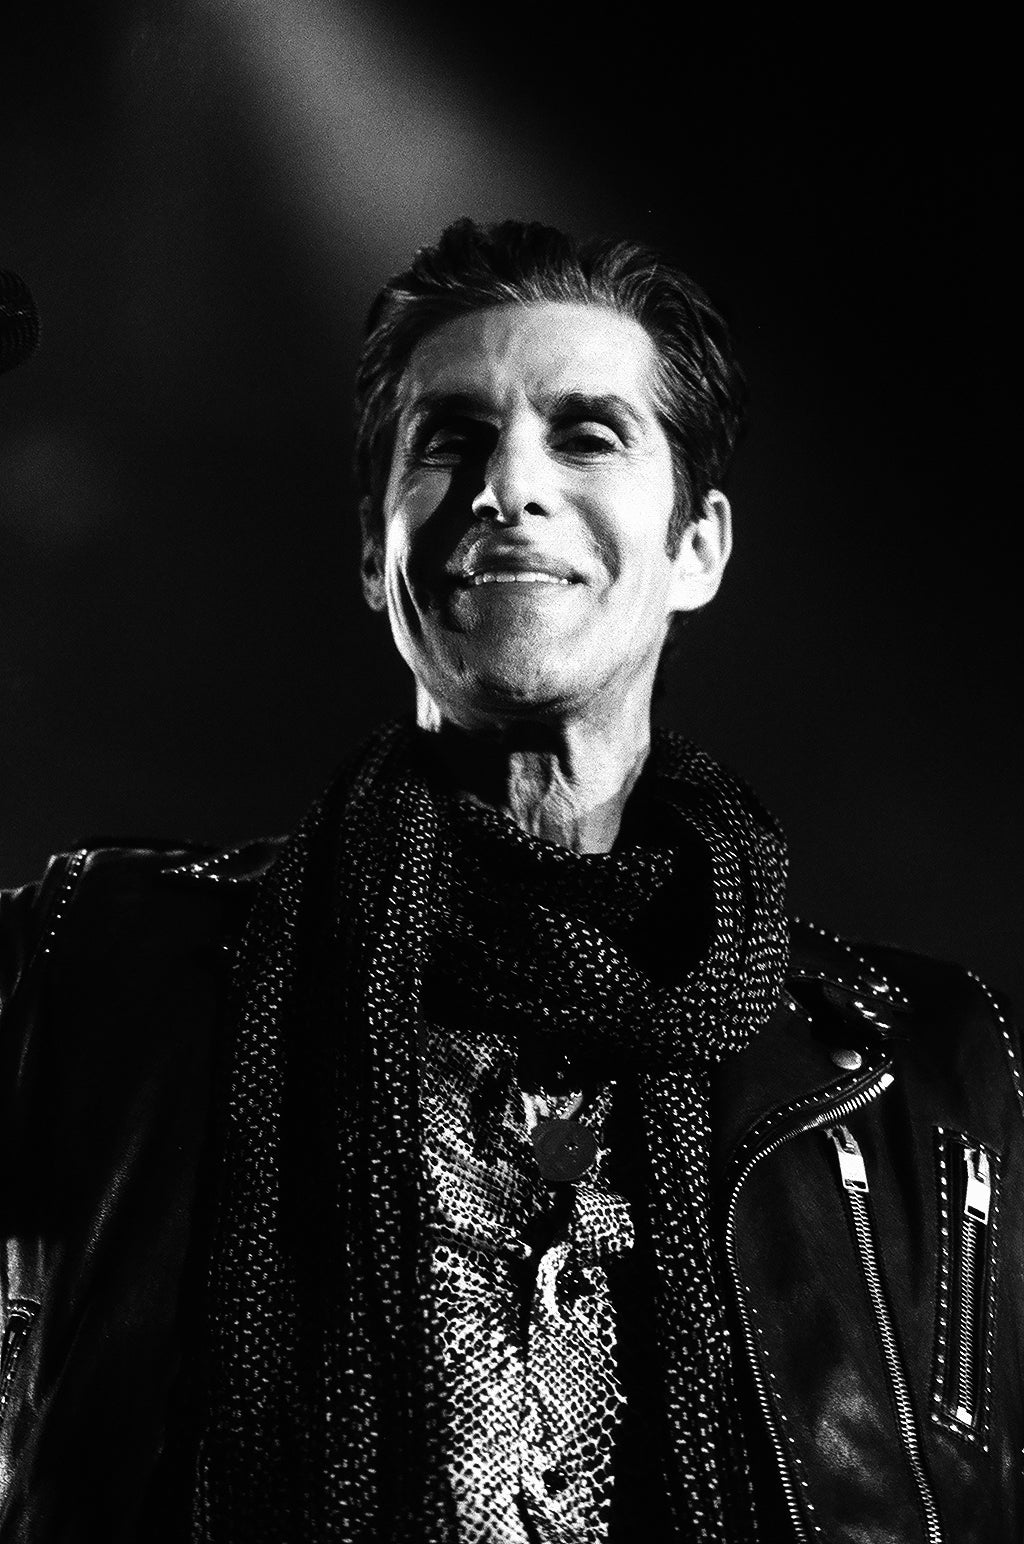 Perry Farrell (4) 8x10 loose print